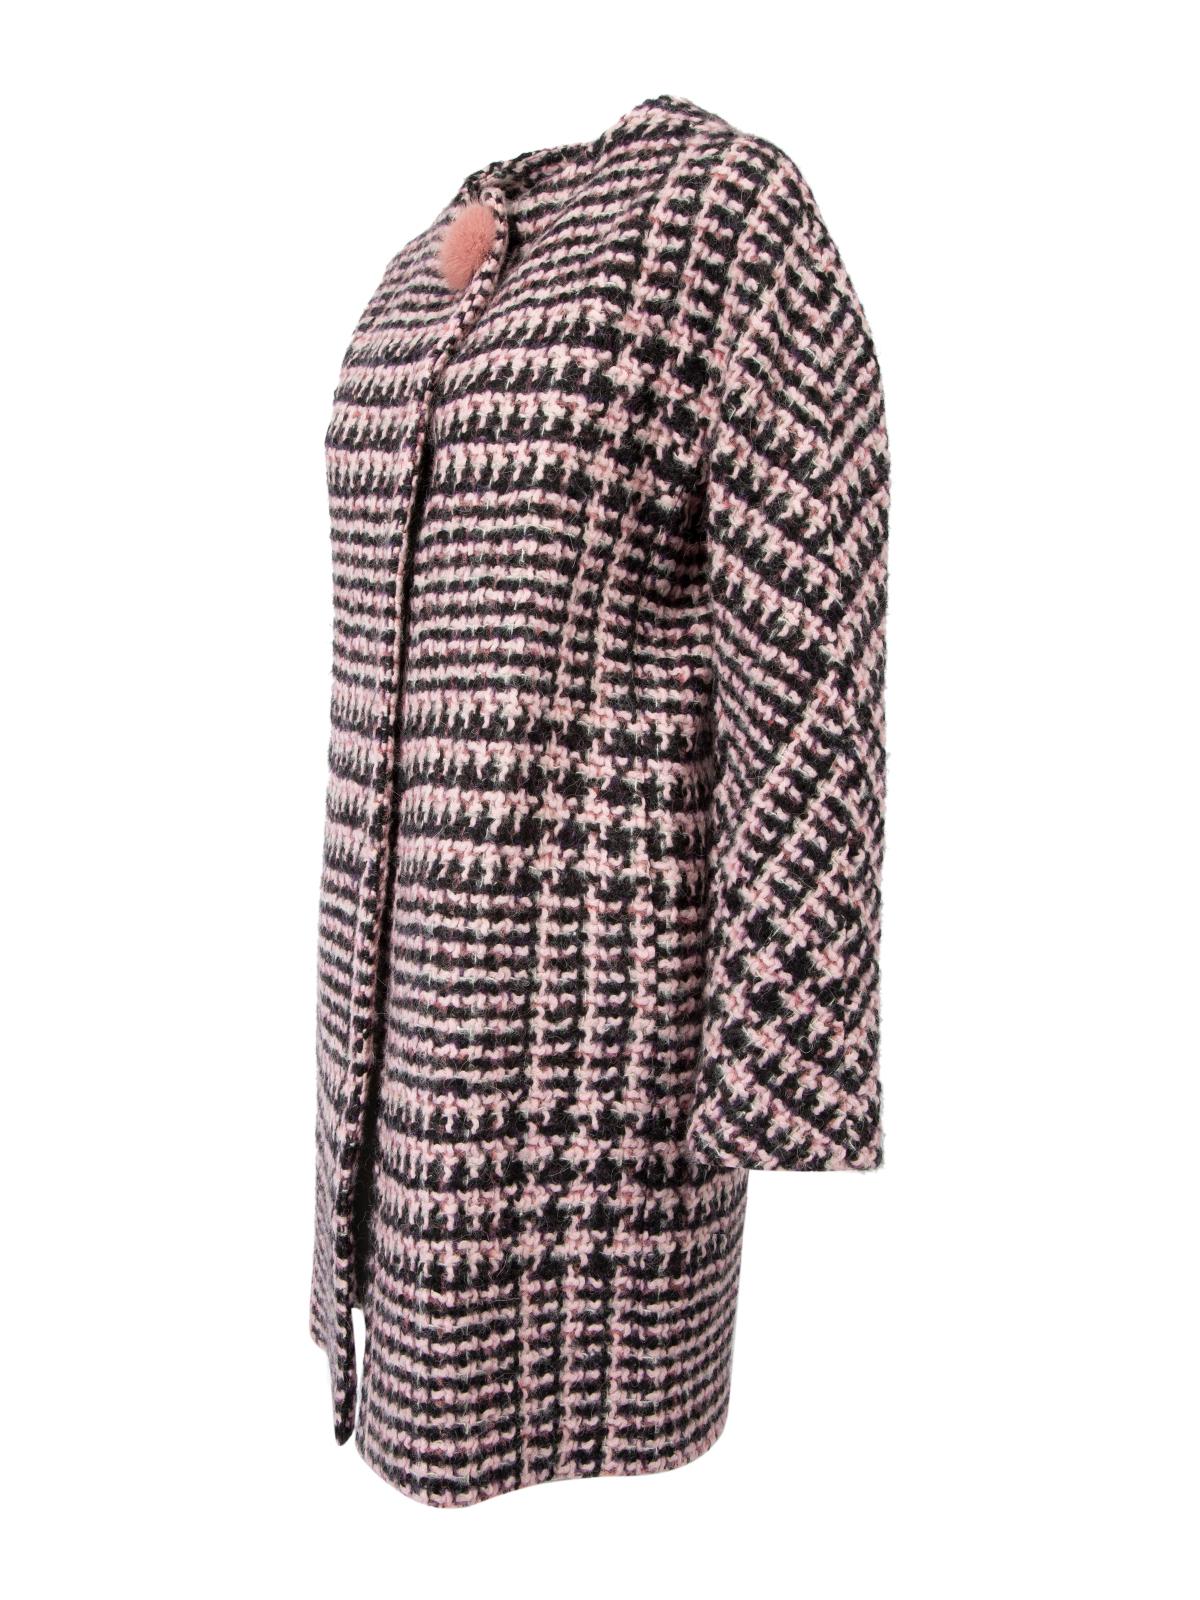 Pre-Loved Ermanno Scervino Women's Pink and Brown Tweed Long Coat For Sale 1